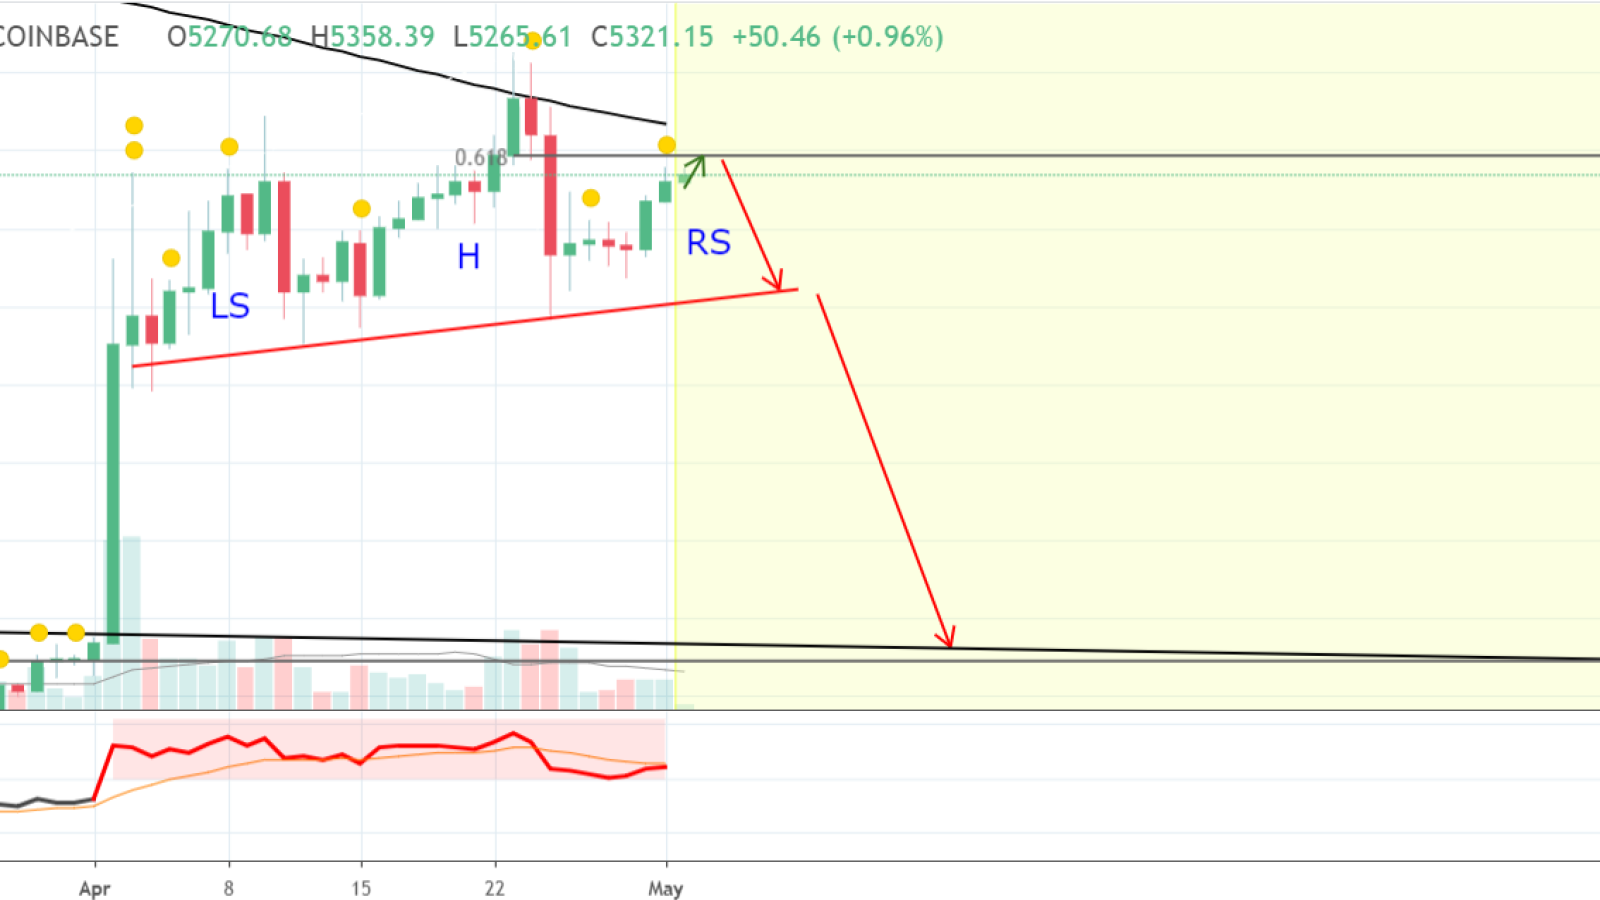 Head and shoulders pattern on BTC price chart